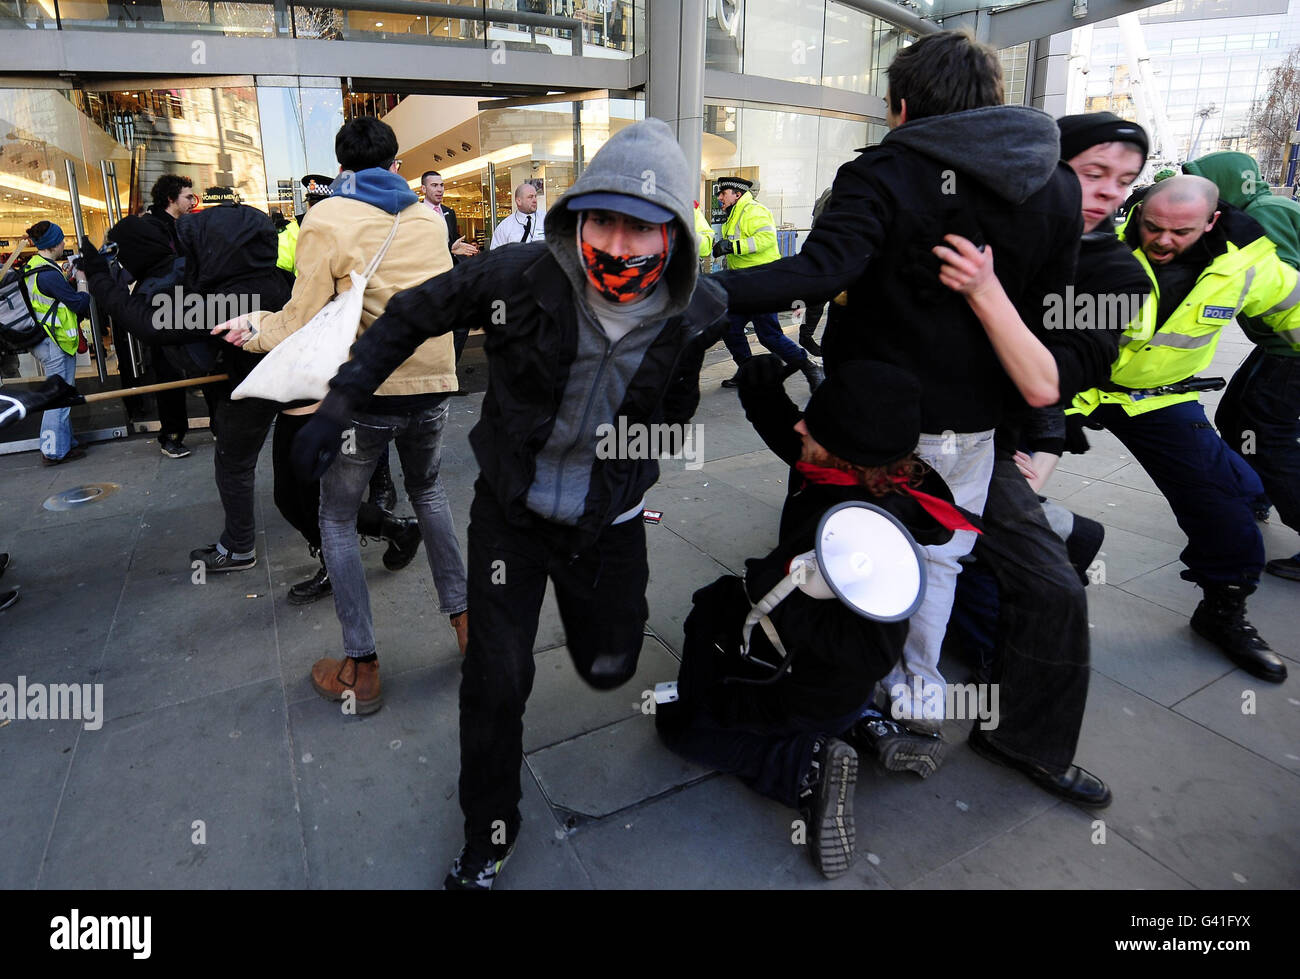 The Manchester demonstration turns violent as protestors try and break into city centre shops. Stock Photo